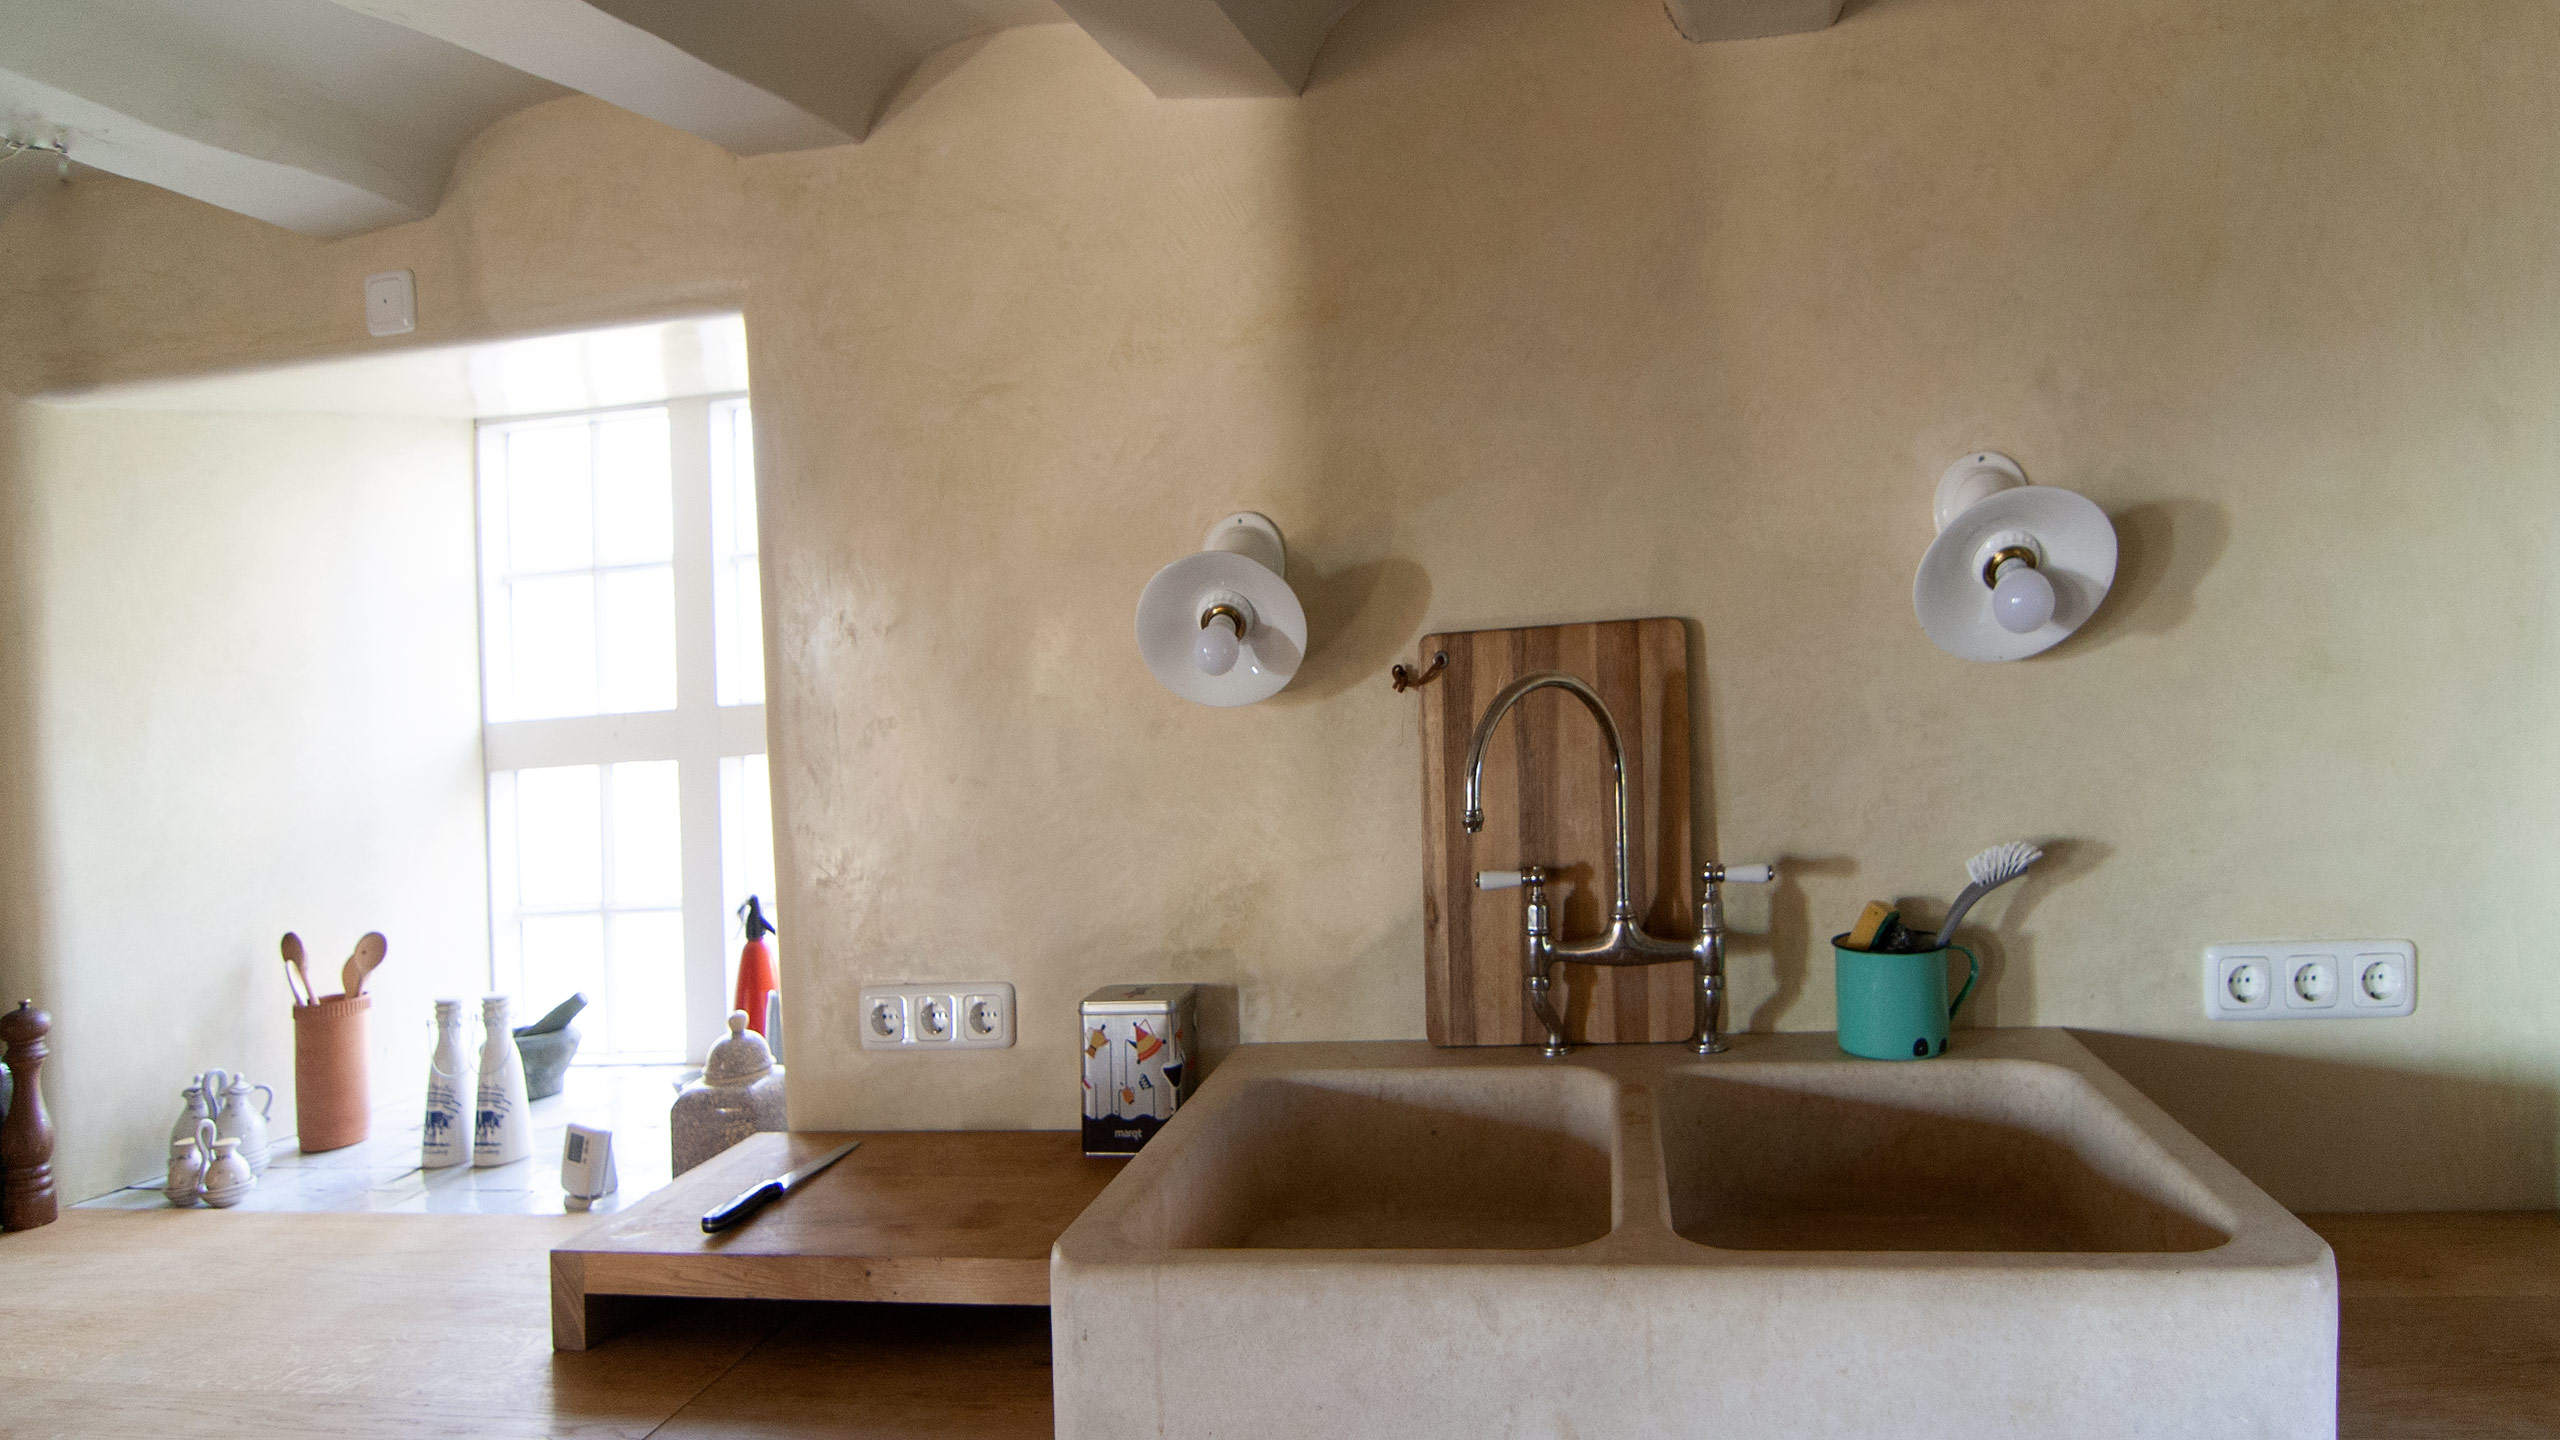 Waterproof Stucco - Country House Kitchen, The sink